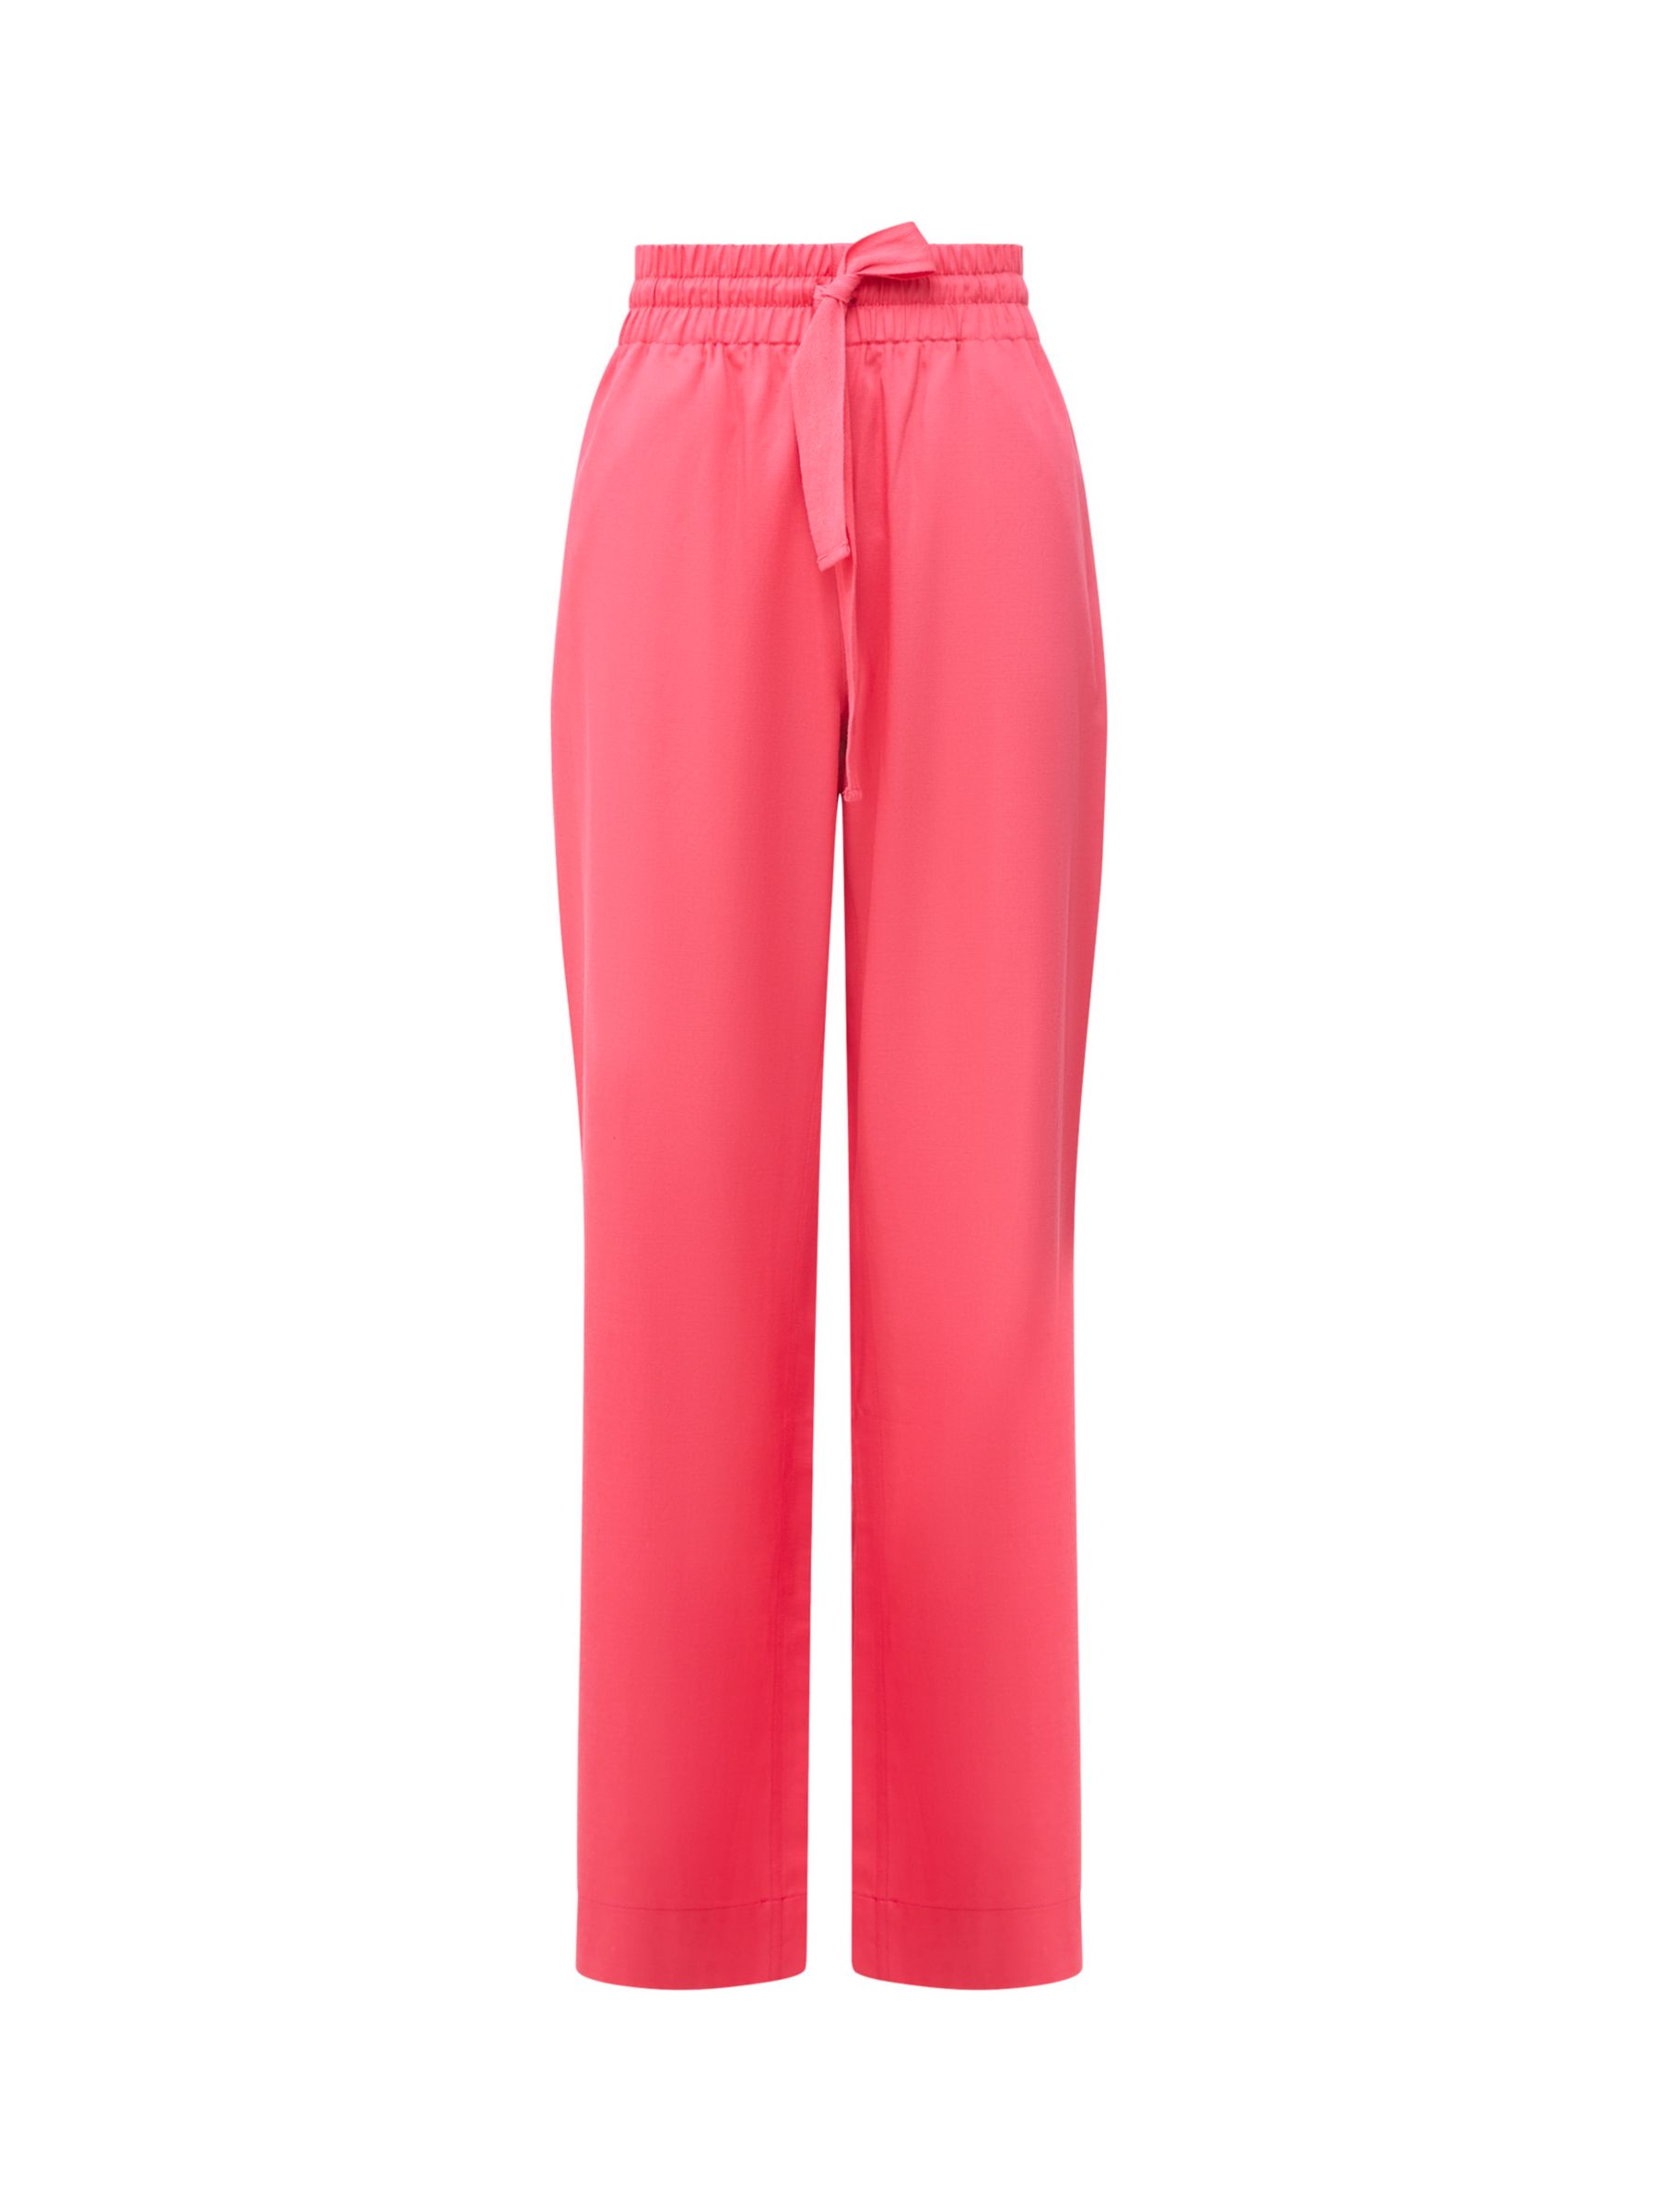 French Connection Bodie Cotton Blend Trousers, Azalea, S